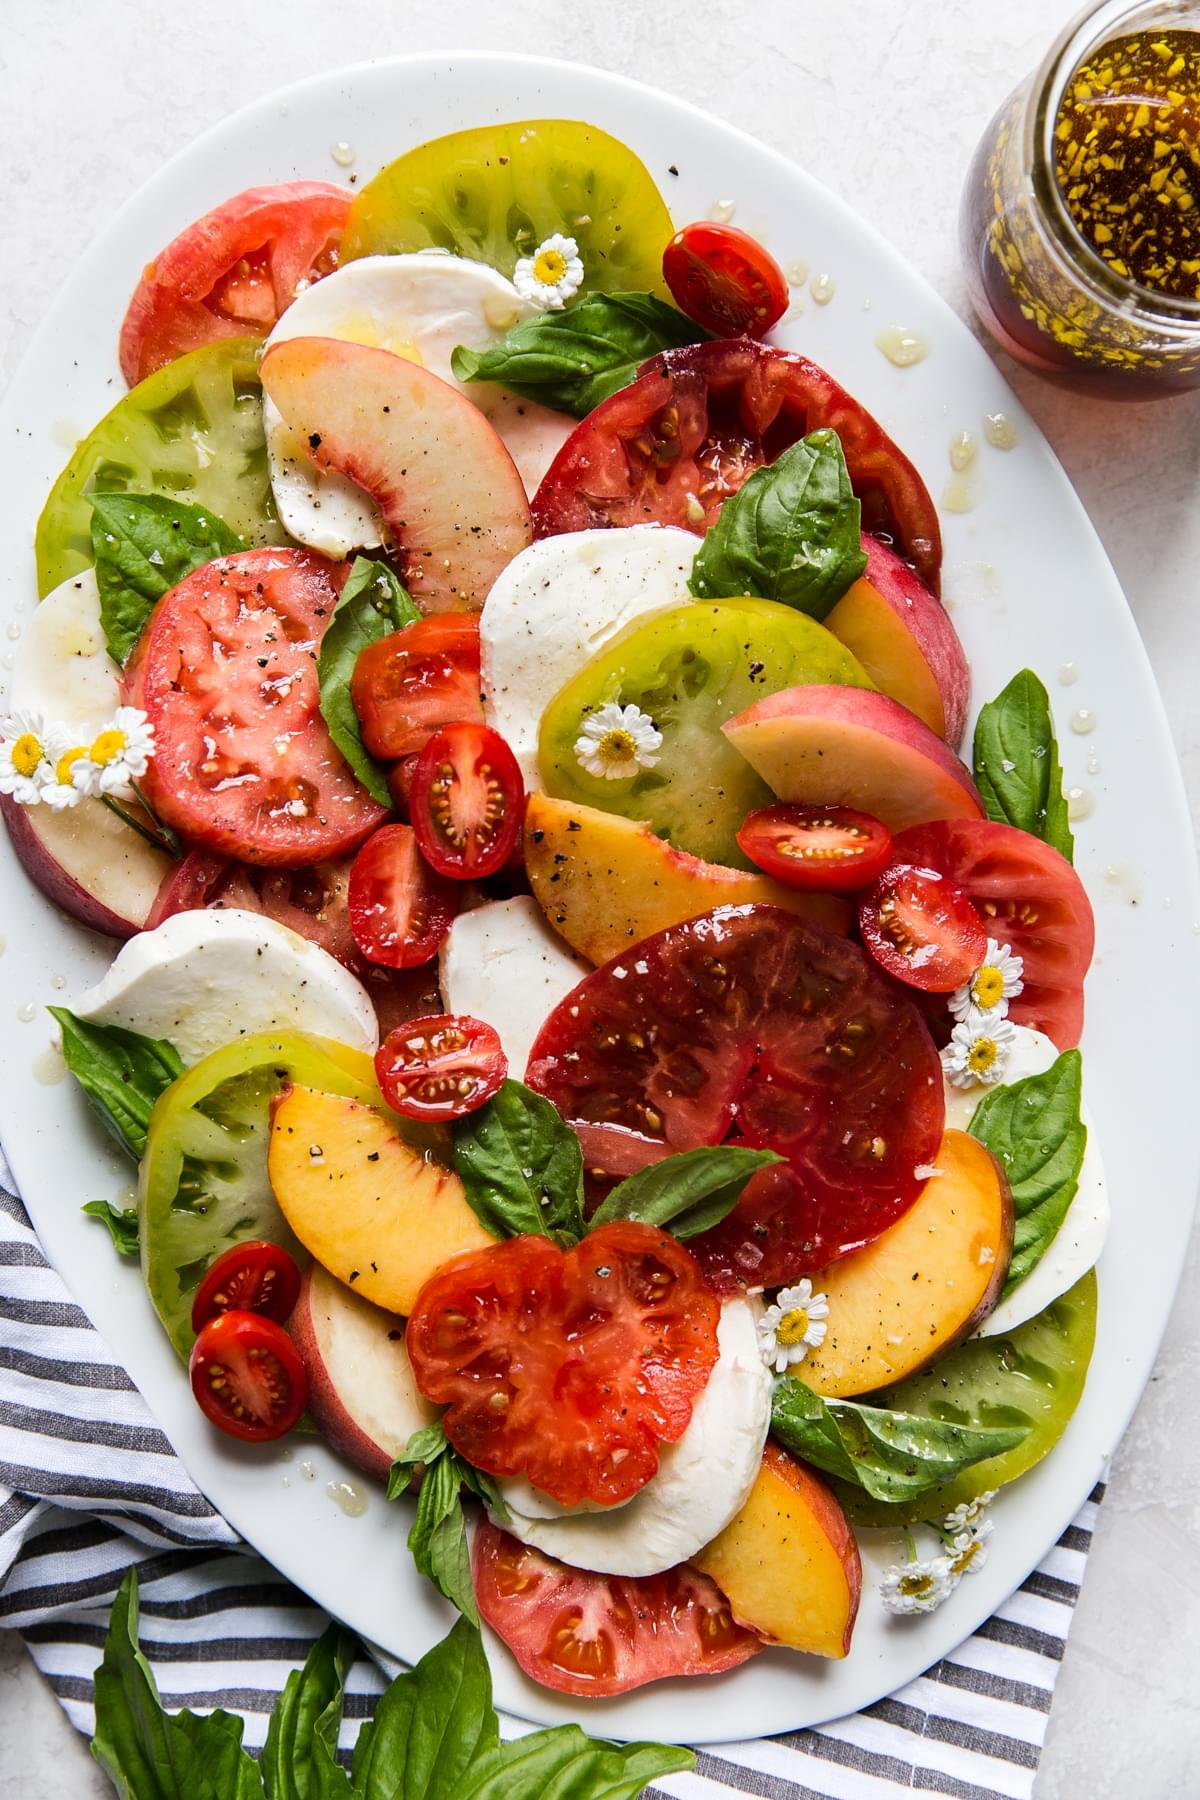 Peach, tomato and mozzarella caprese salad topped with fresh basil and a jar of homemade salad dressing.